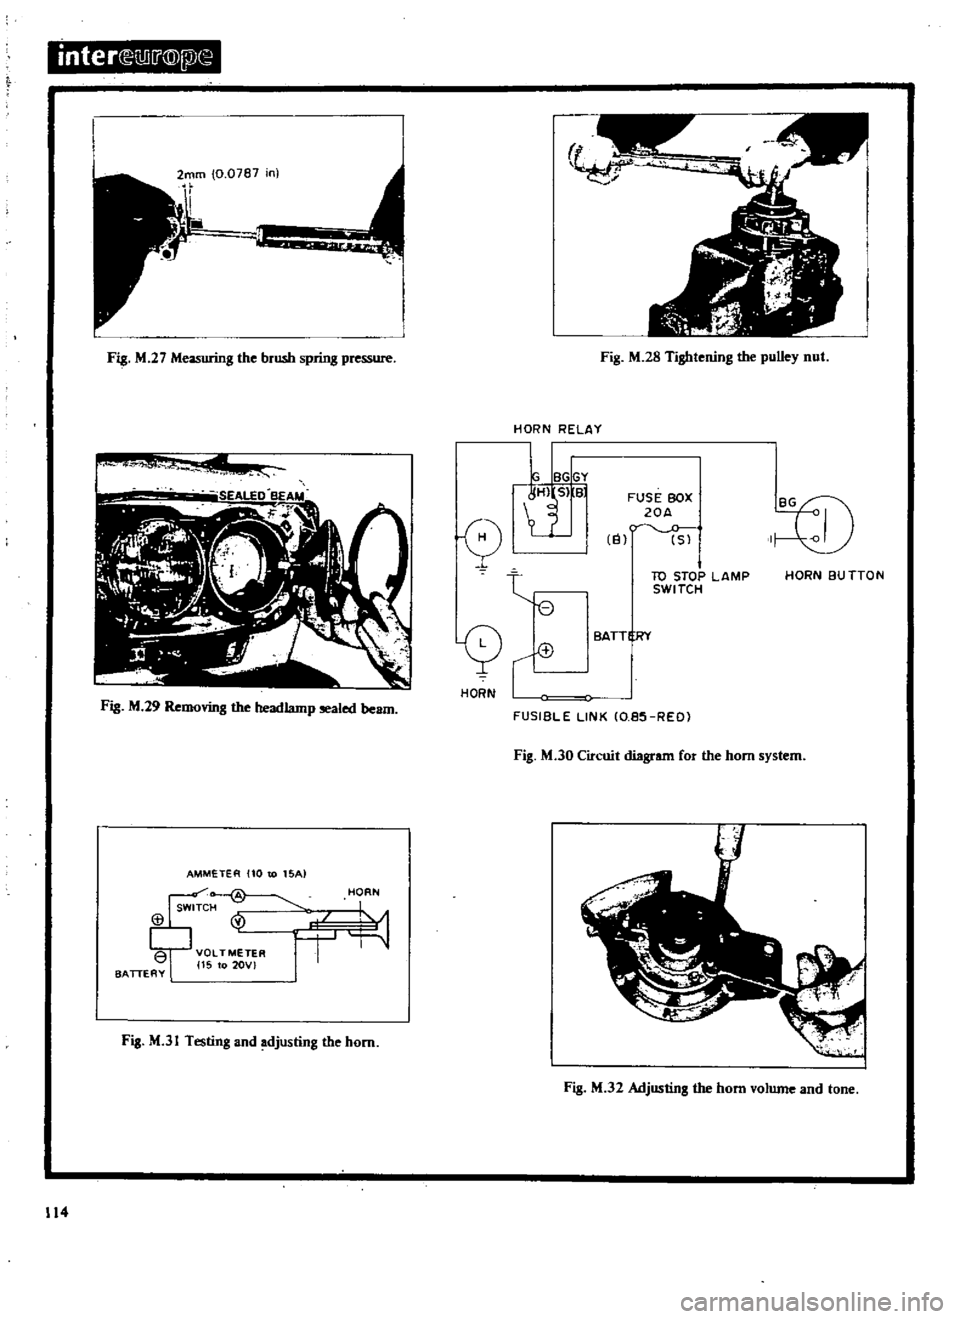 DATSUN 510 1969  Service Repair Manual 
inter 
ill
1

@
fl@

2mm 
O 
07e7 
in

l

r

Fig 
M 
27

Measuring 
the 
brush

spring 
pressure

oo

fI
f

Fig 
M 
29 
R

h 
the

headlamp 
Ied 
beam

AMM
E
iER 
HO 
to

SA

HO 
N

SWITCH

1

VOLTME